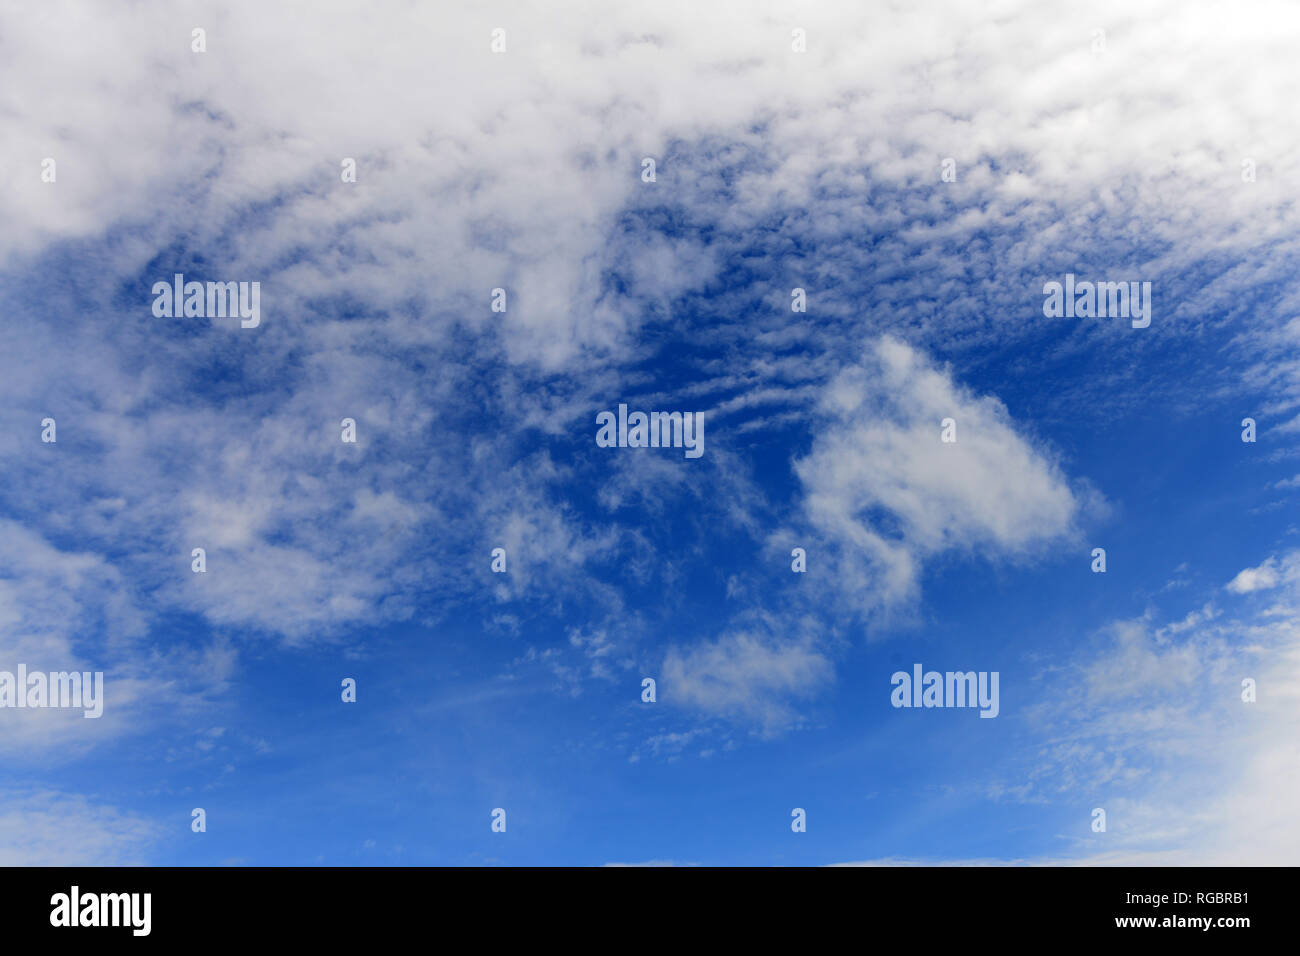 mother nature, beautiful blue sky with clouds Stock Photo